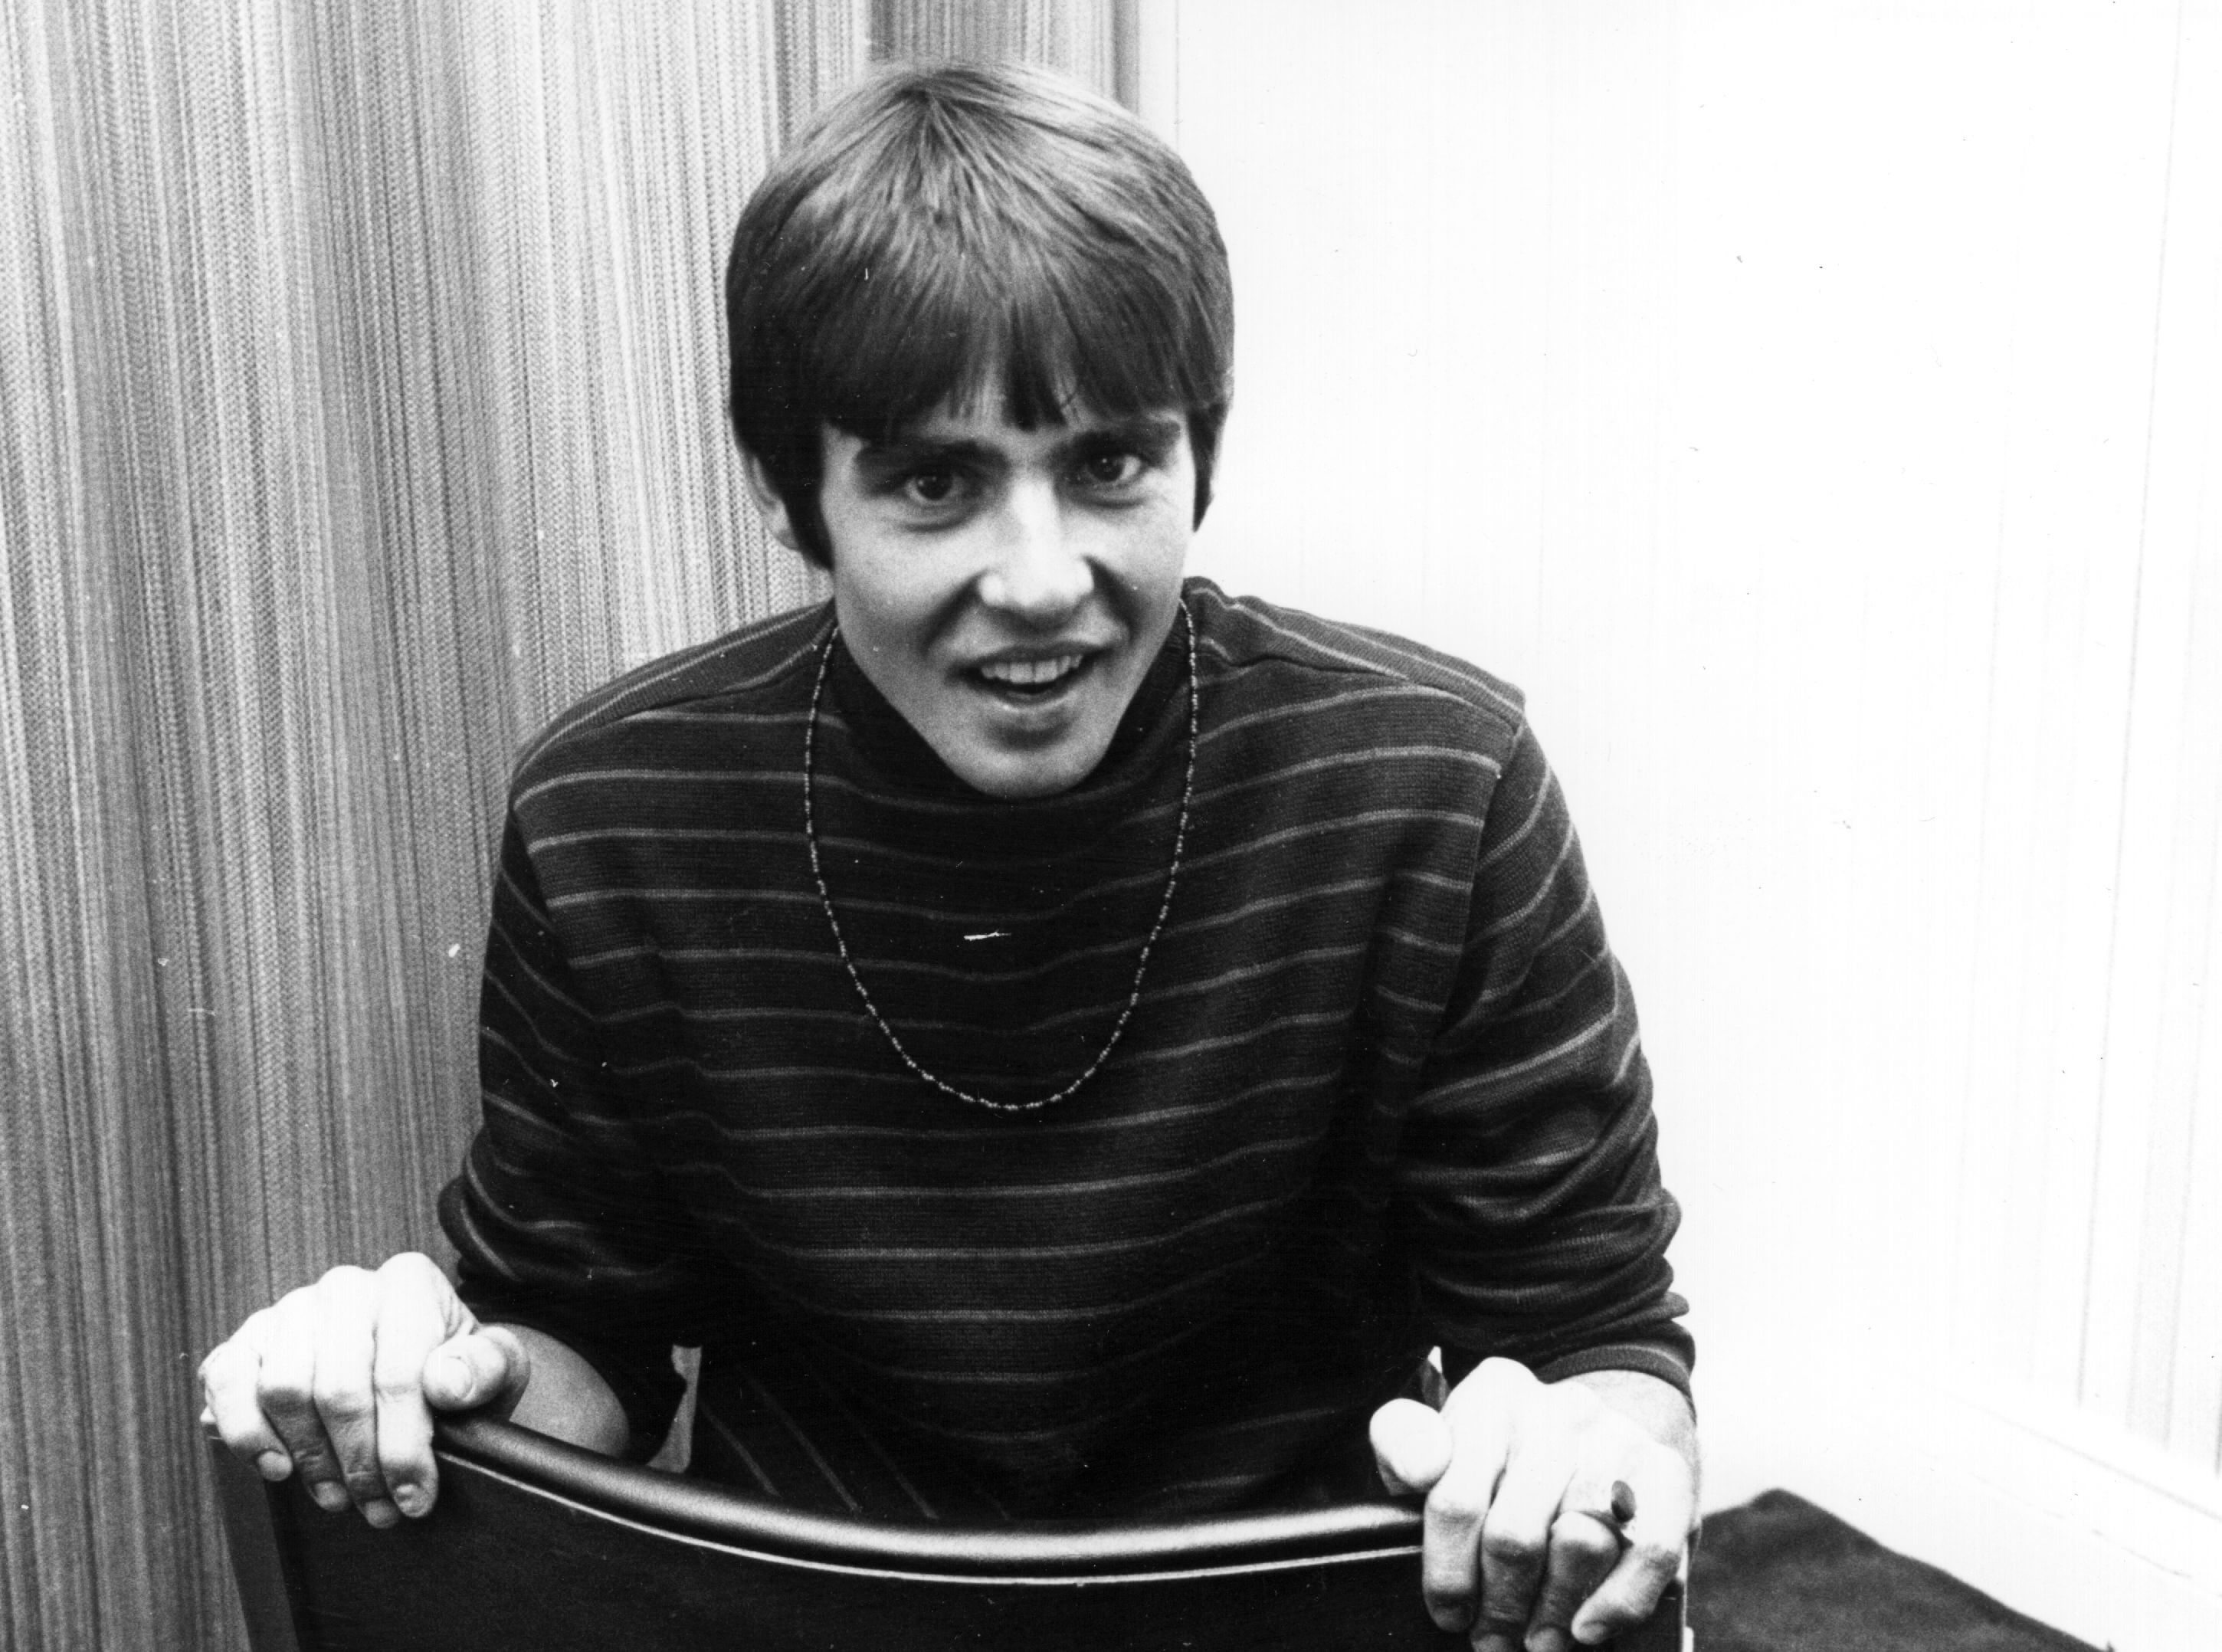 The Monkees' Davy Jones in a chair